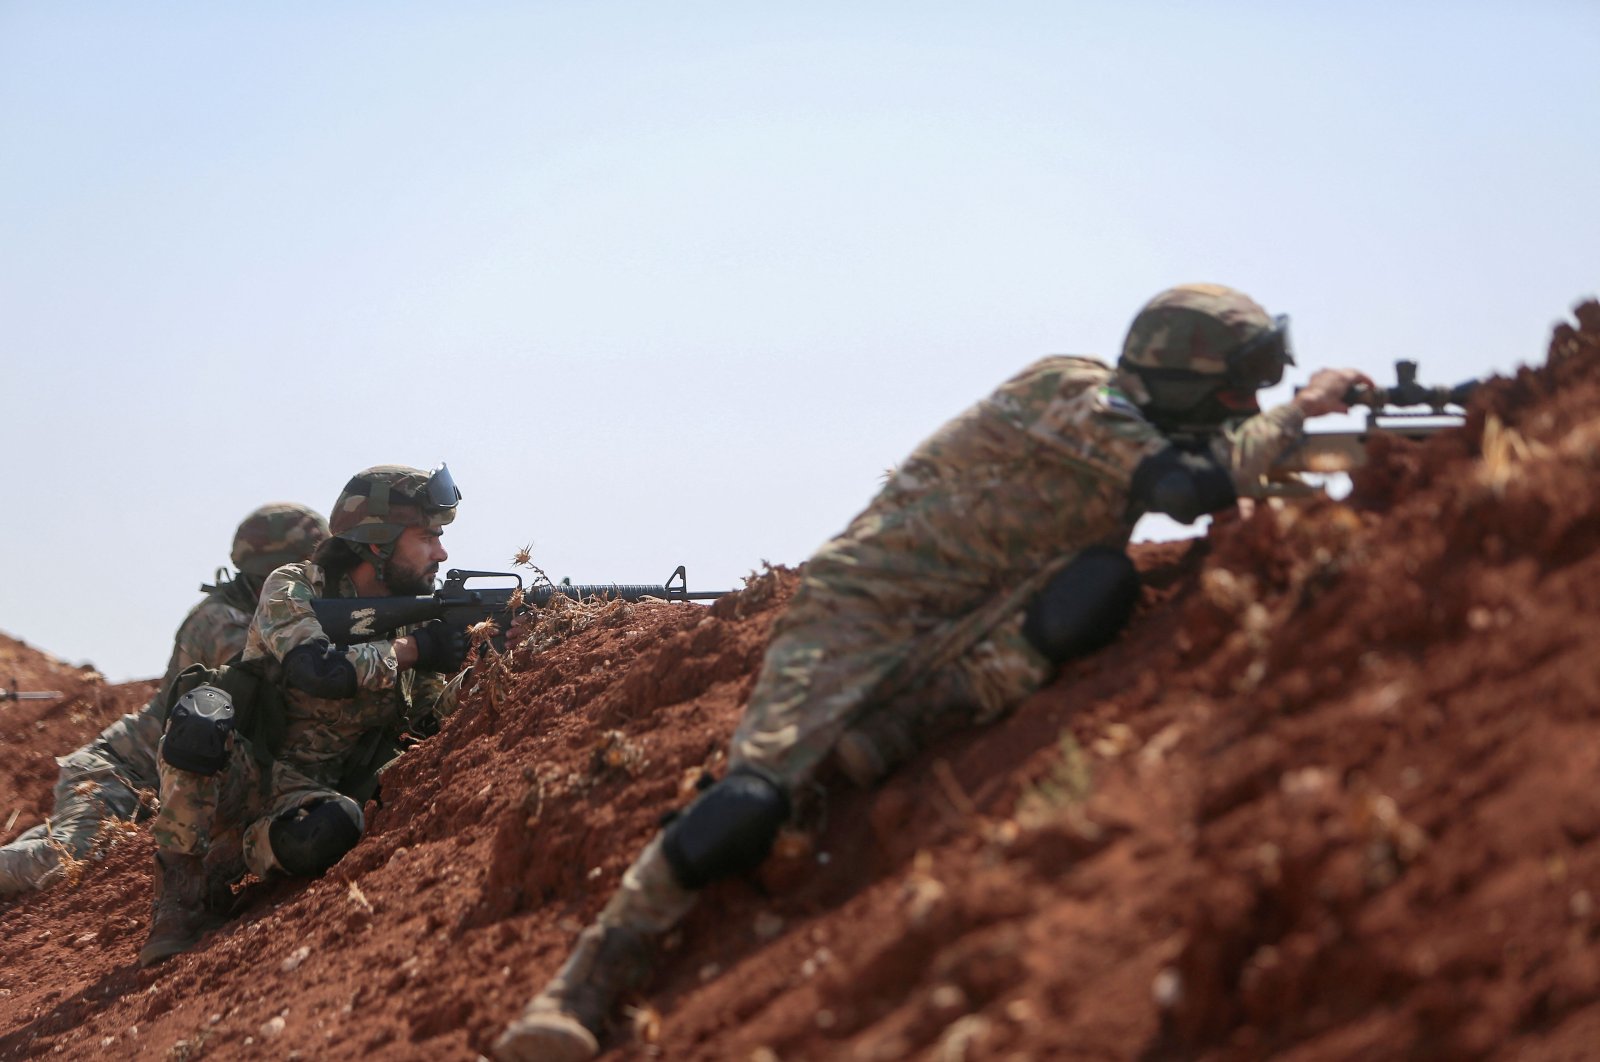 Türkiye-backed Syrian opposition forces are stationed at a position on the outskirts of the town of Marea, in the northern Aleppo countryside, along the frontline with areas held by YPG terrorists, Syria, Aug. 20, 2022. (AFP Photo)